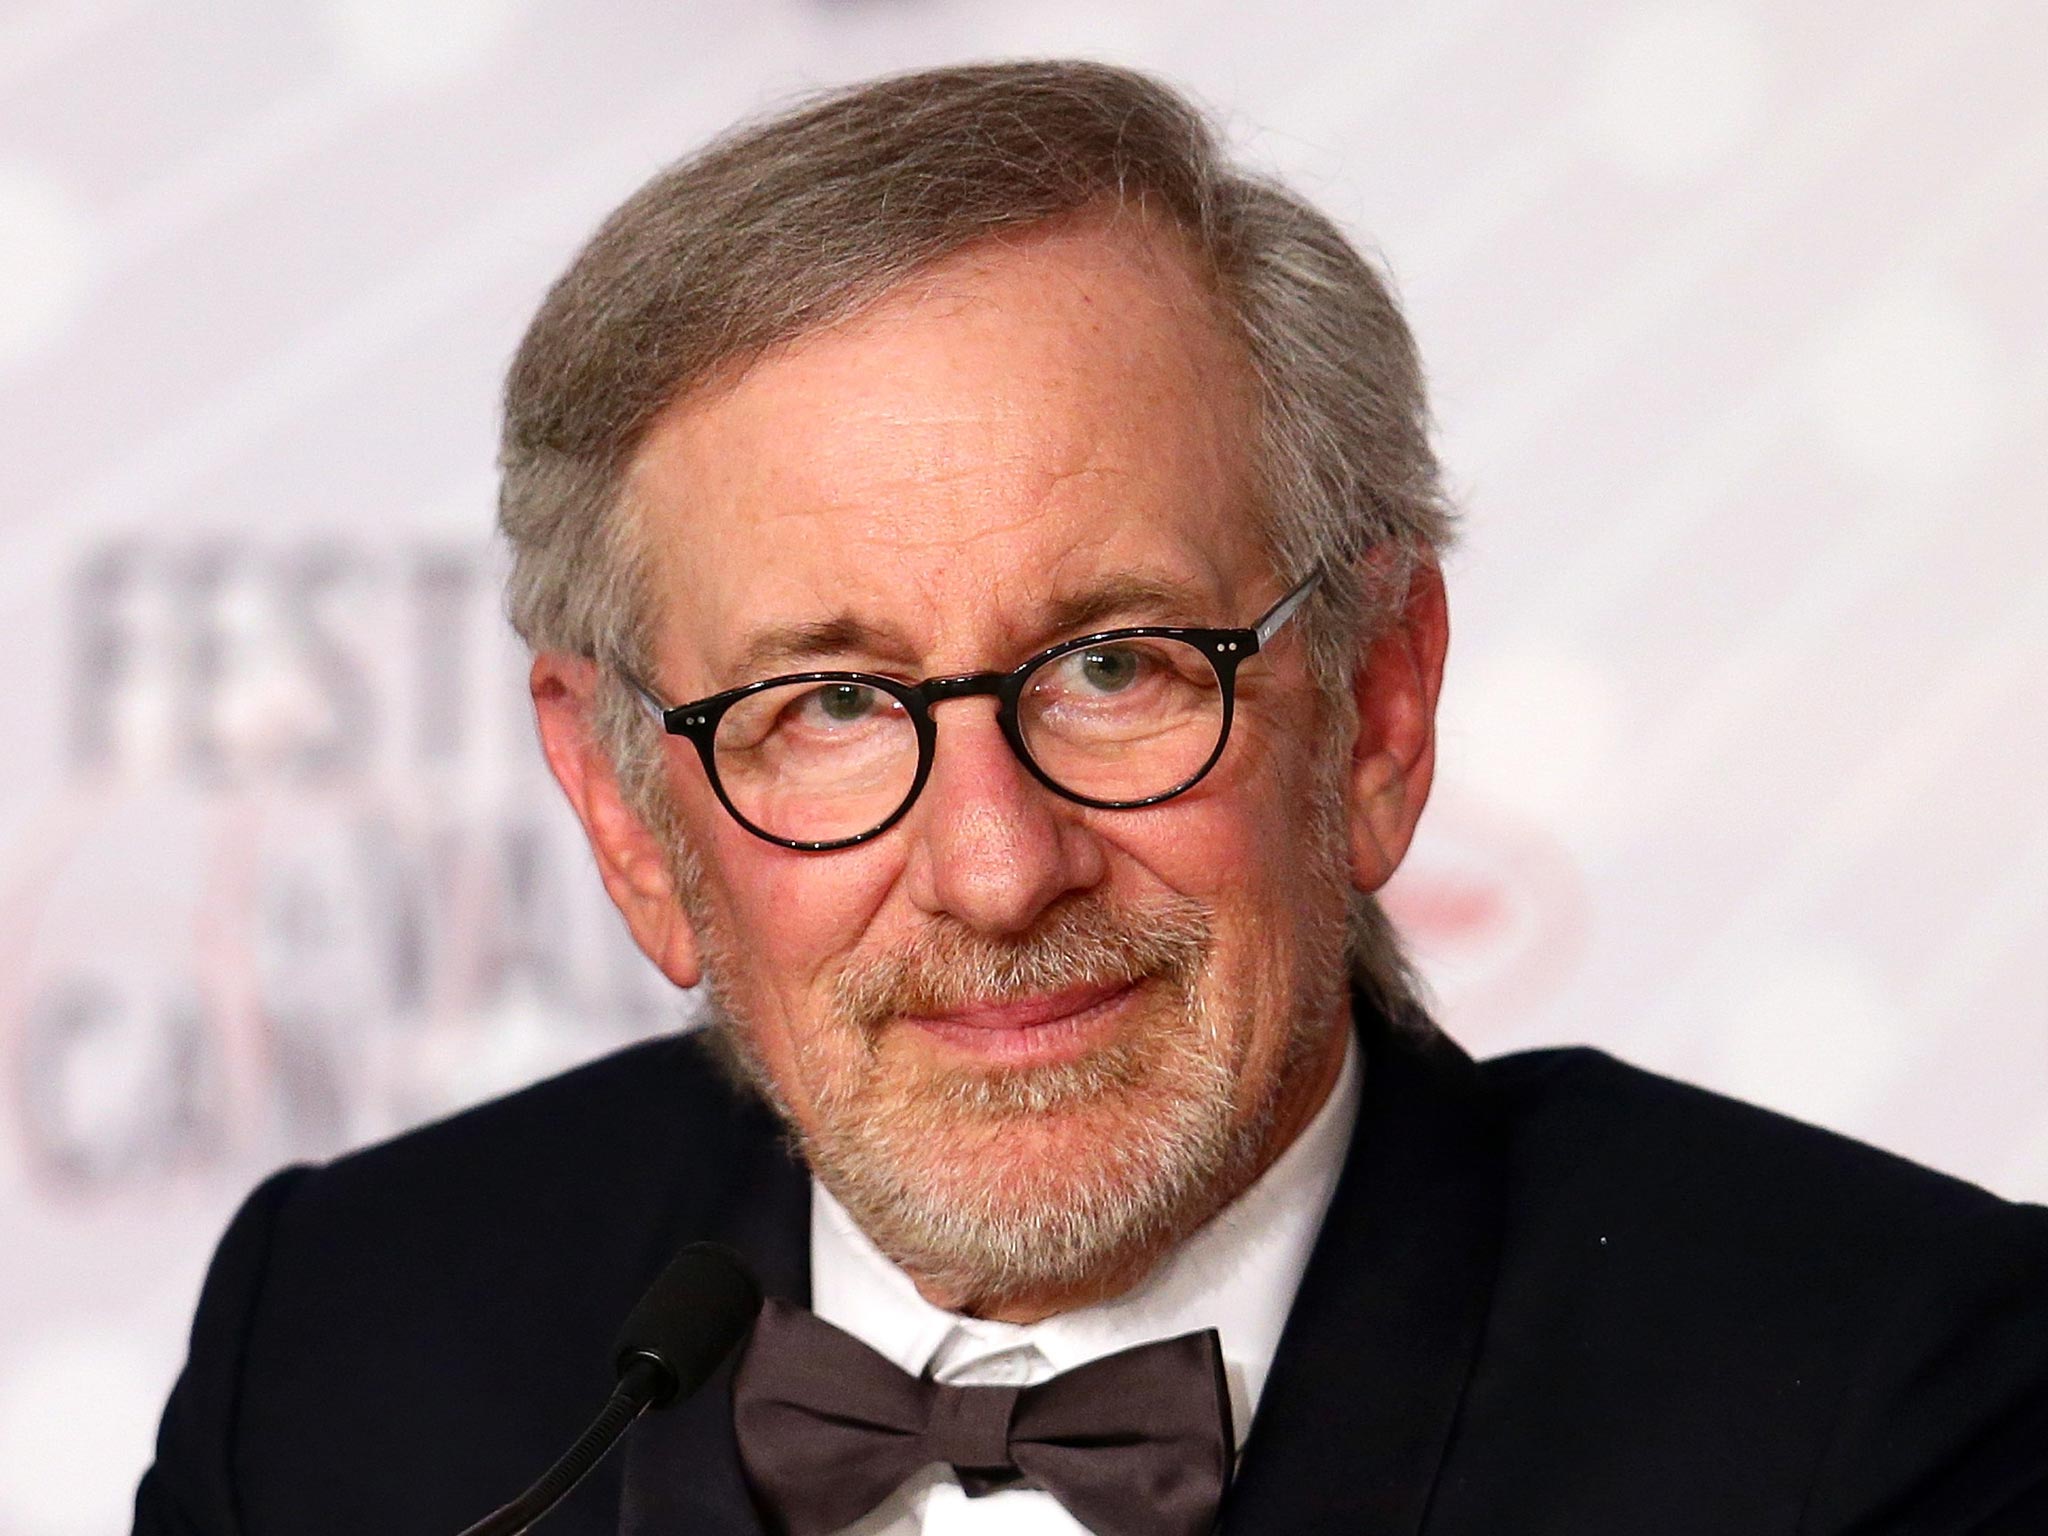 Steven Spielberg Doesn't Want to Know His Huge Net Worth